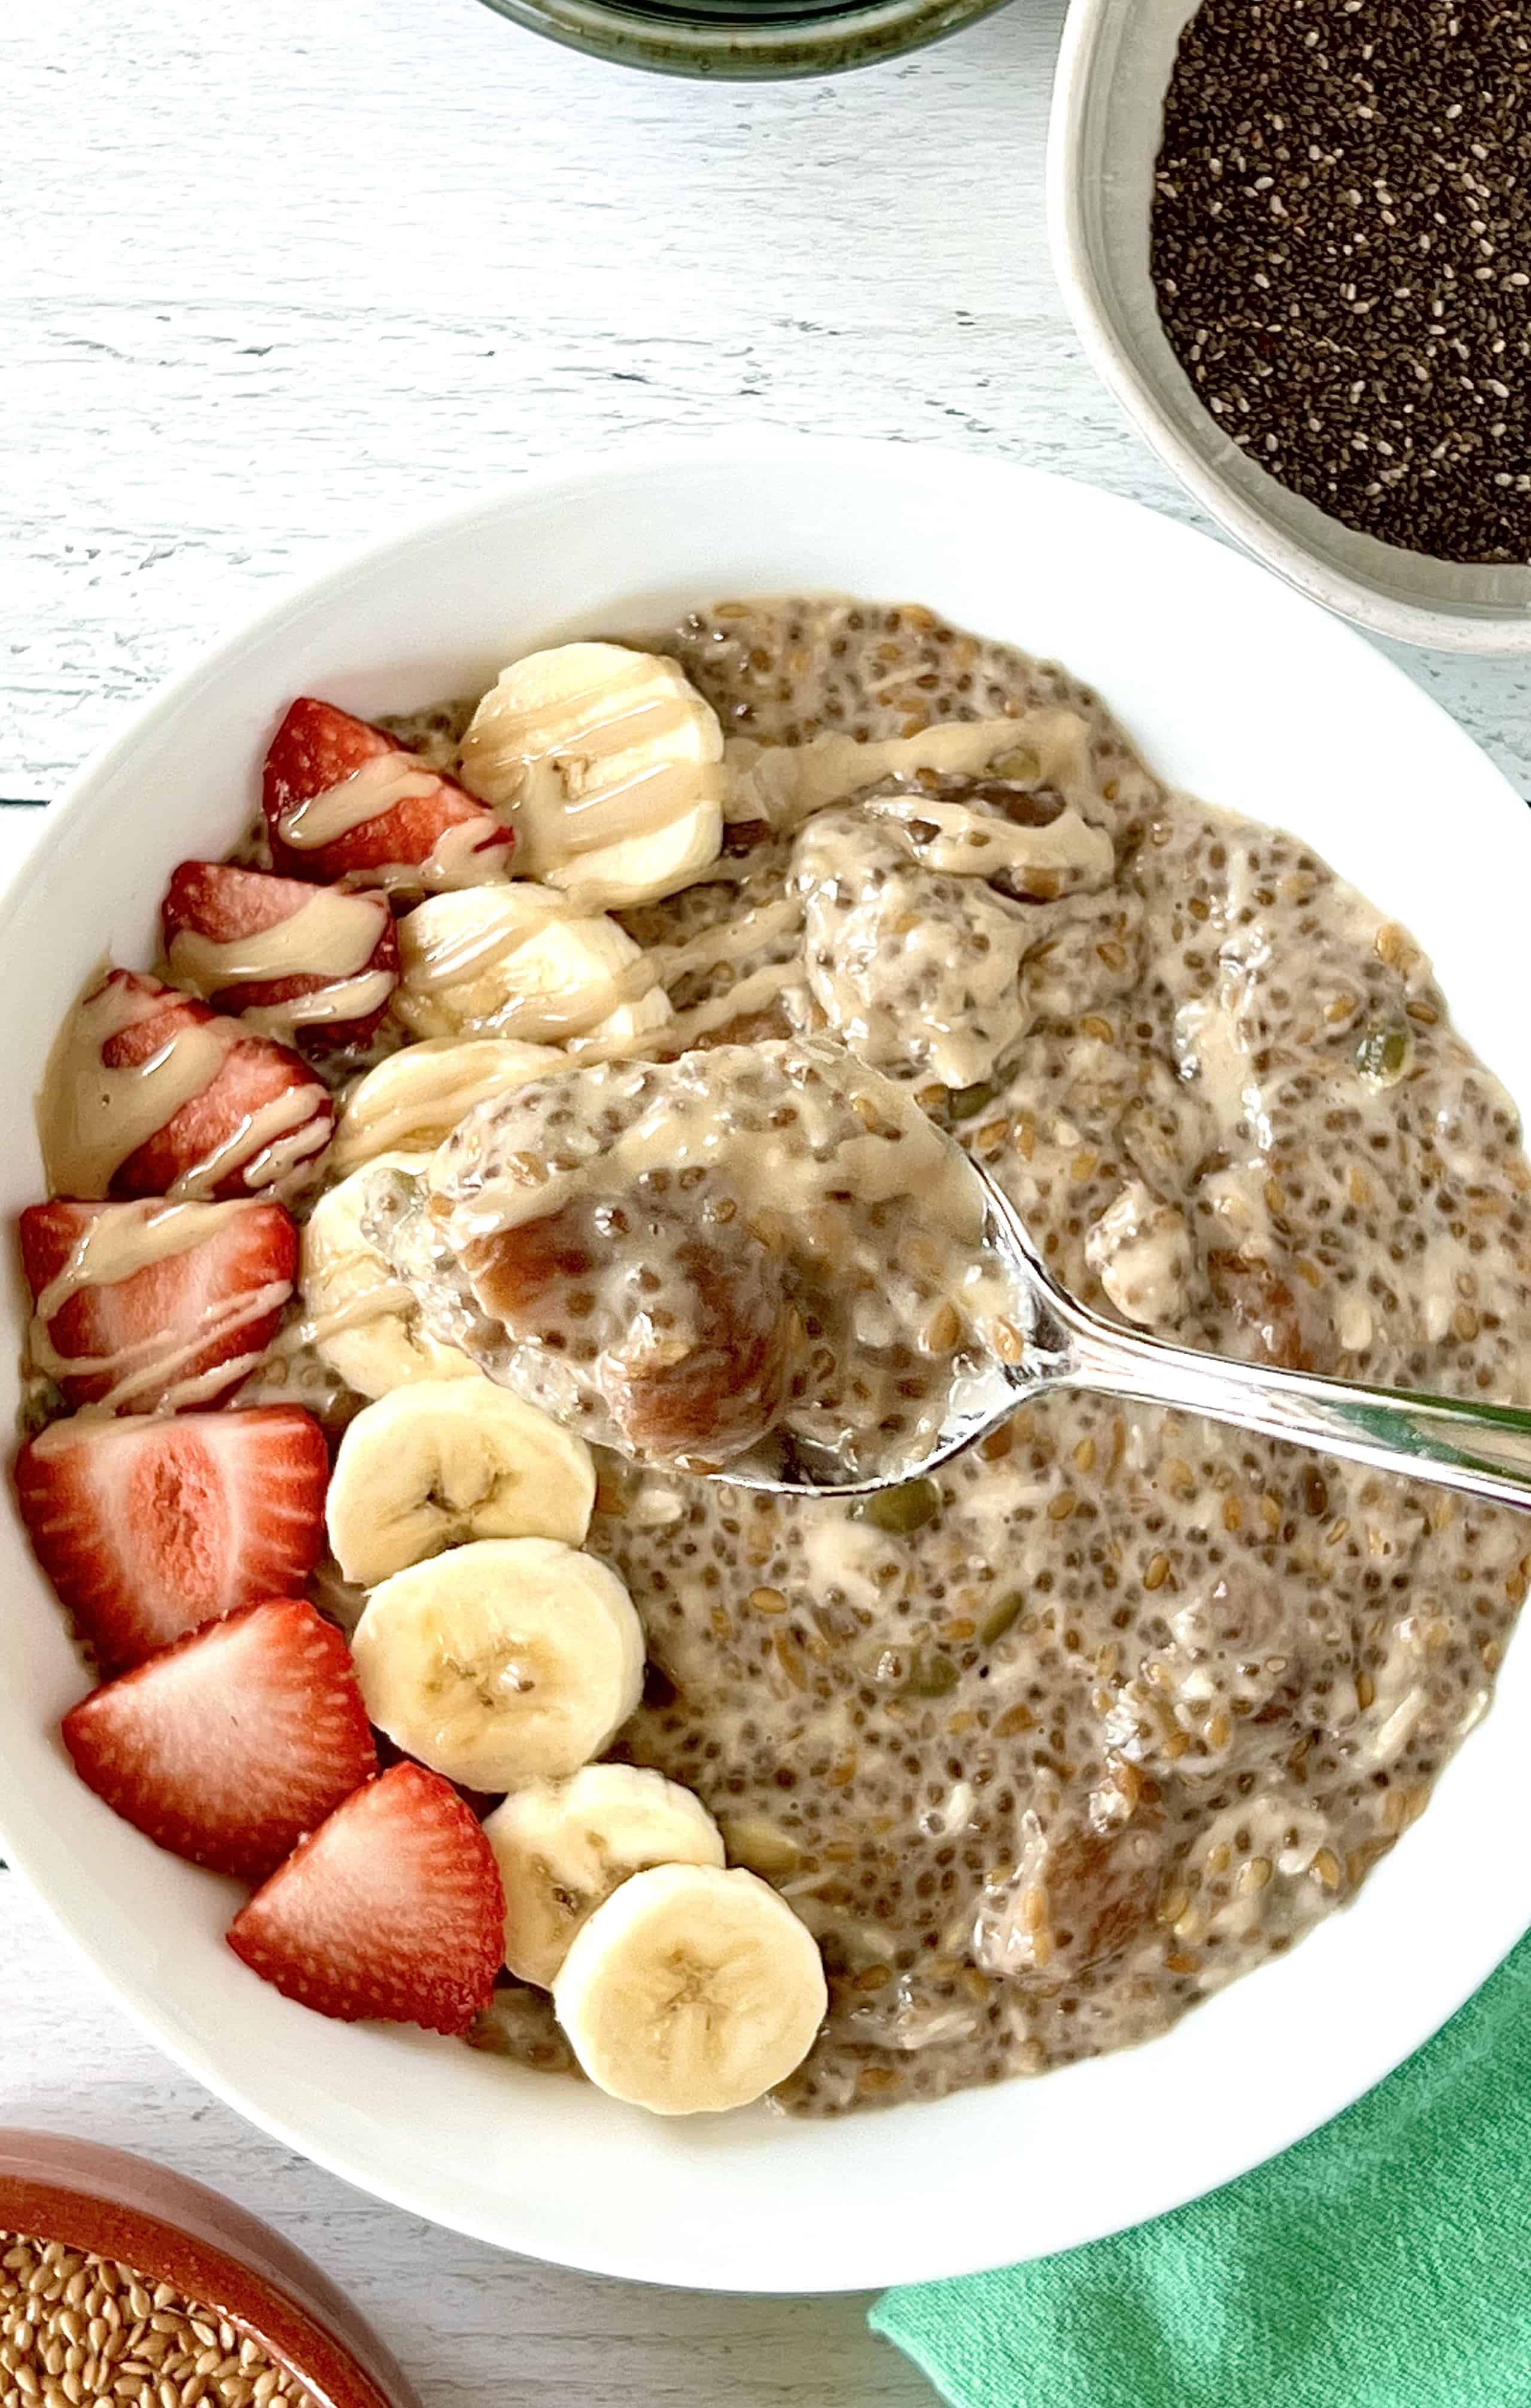 Grain-free Paleo oatmeal made with seeds and non-dairy milk in a shallow white bowl topped with sliced strawberries and bananas with spoon holding some pudding up over the bowl.